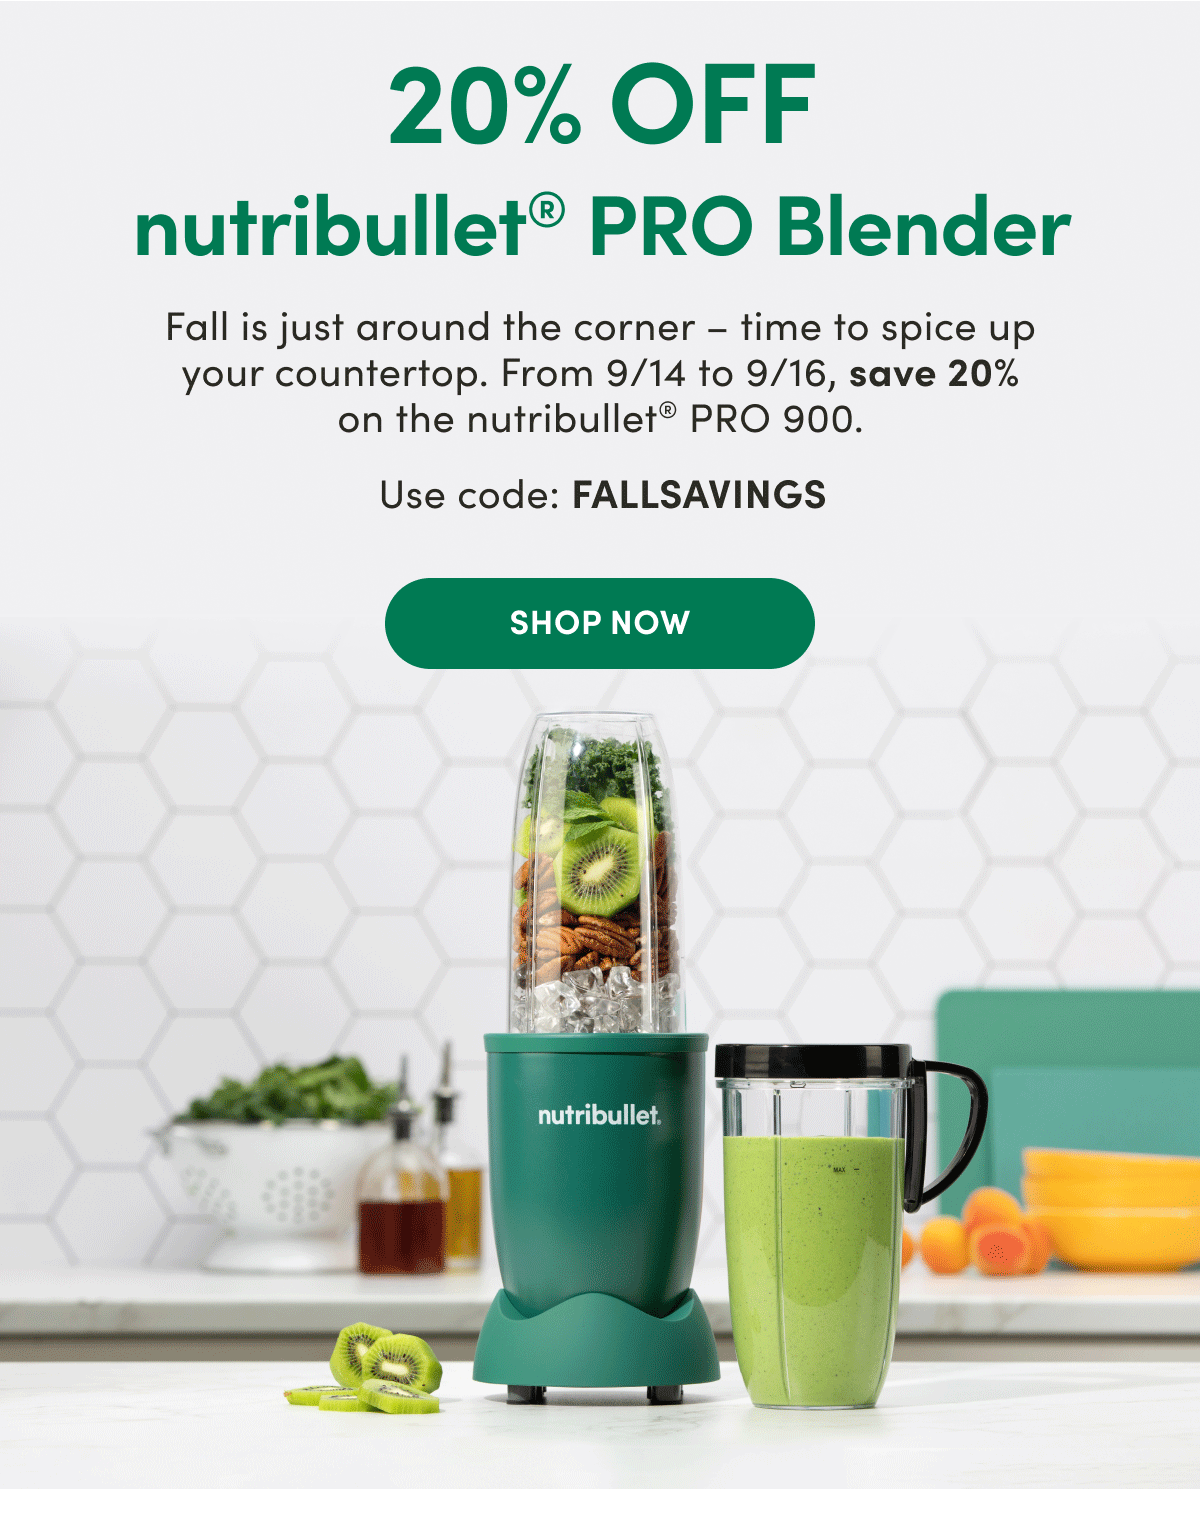 NutriBullet Holiday Sale: Save 20% off All Juicers and Blenders